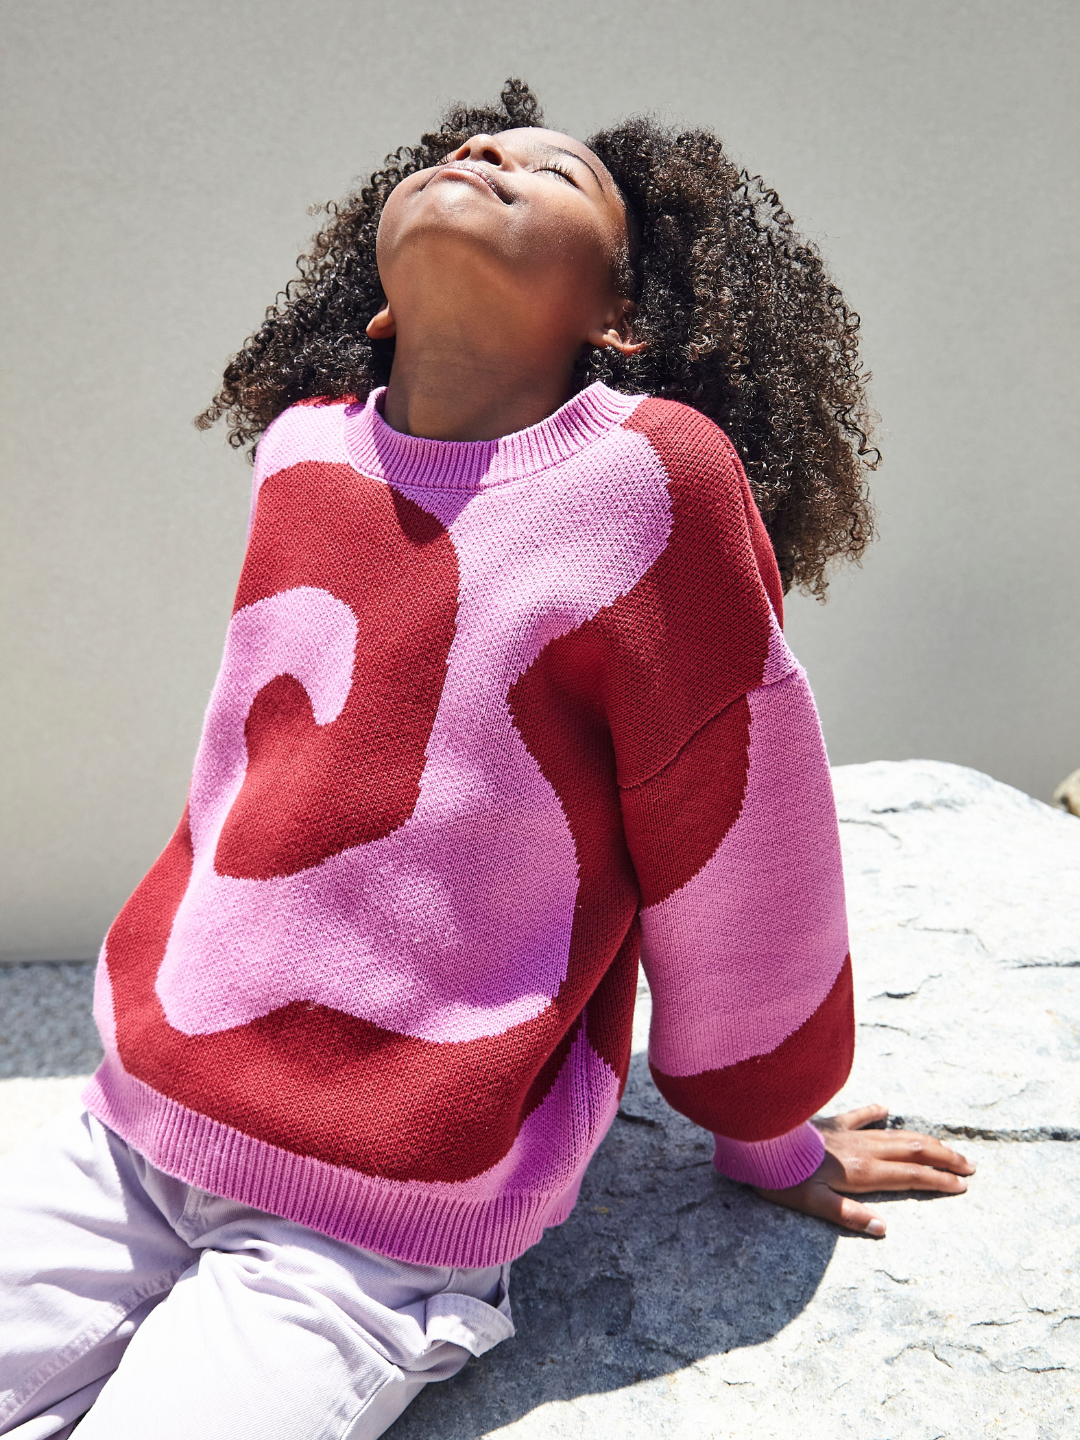 Raspberry | A girl wearing a kids crewneck sweater in bright pink, with a large single red swirl design that covers the entire sweater. She is seated on a rock, with her face turned upwards towards the sun. She wears light purple pants.